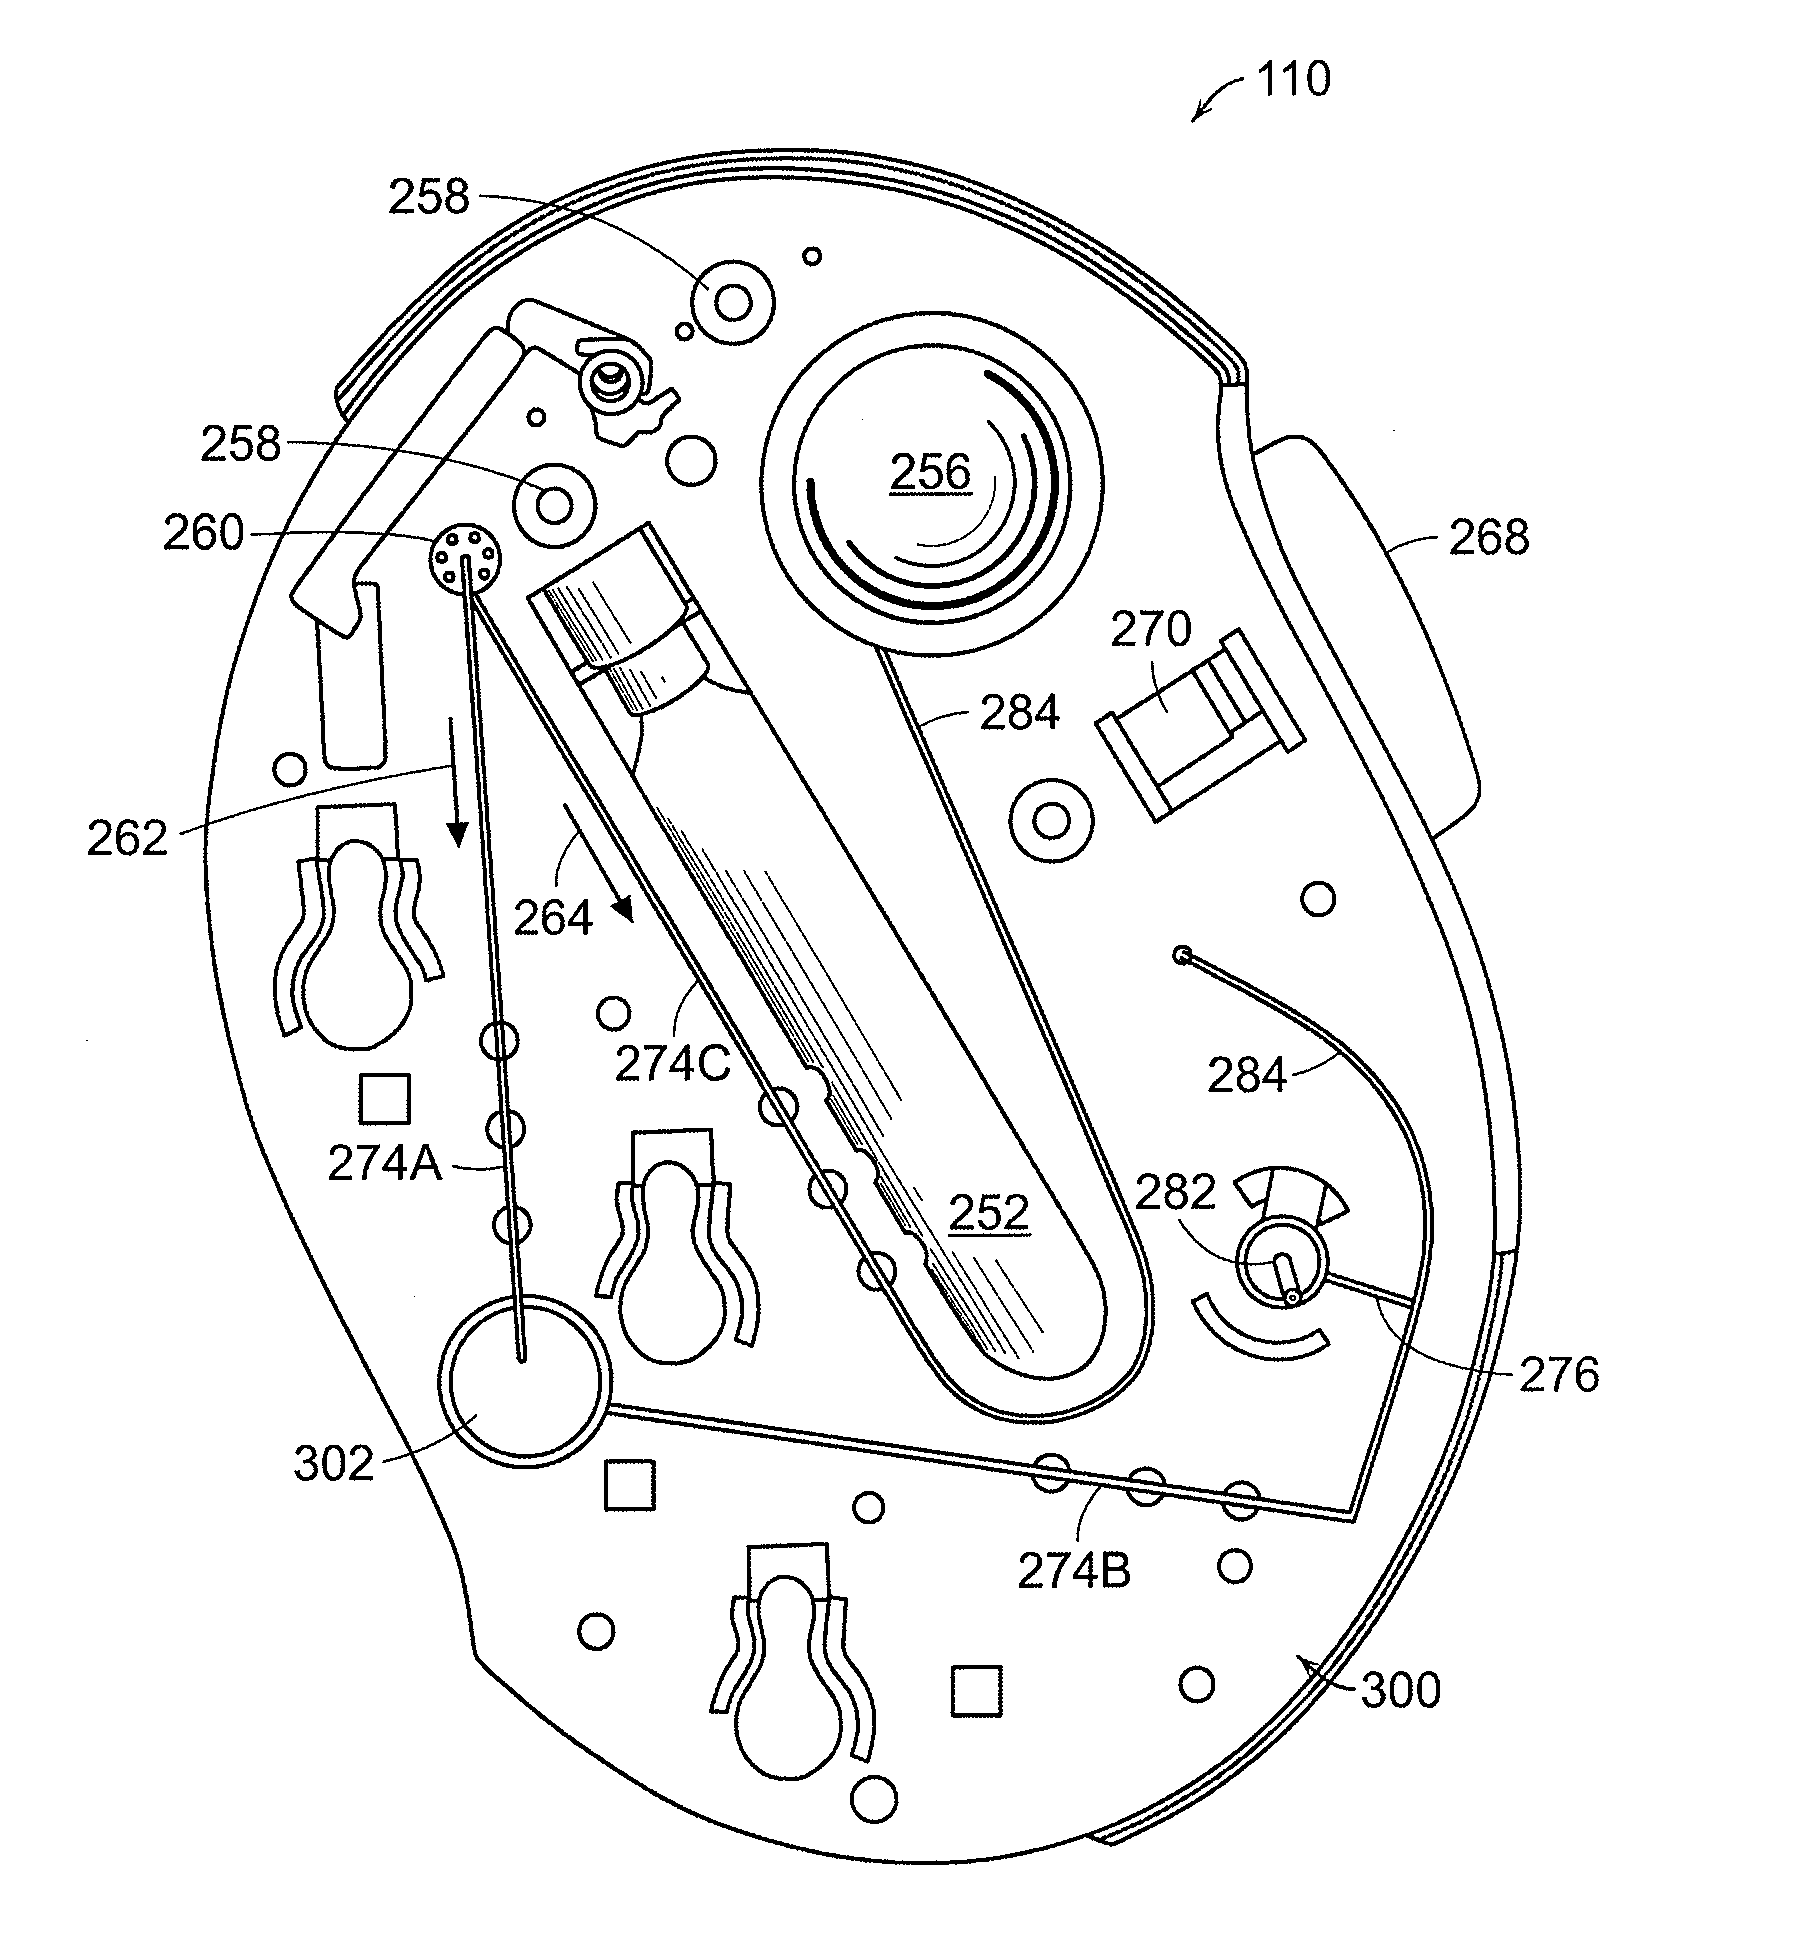 Methods for detecting failure states in a medicine delivery device